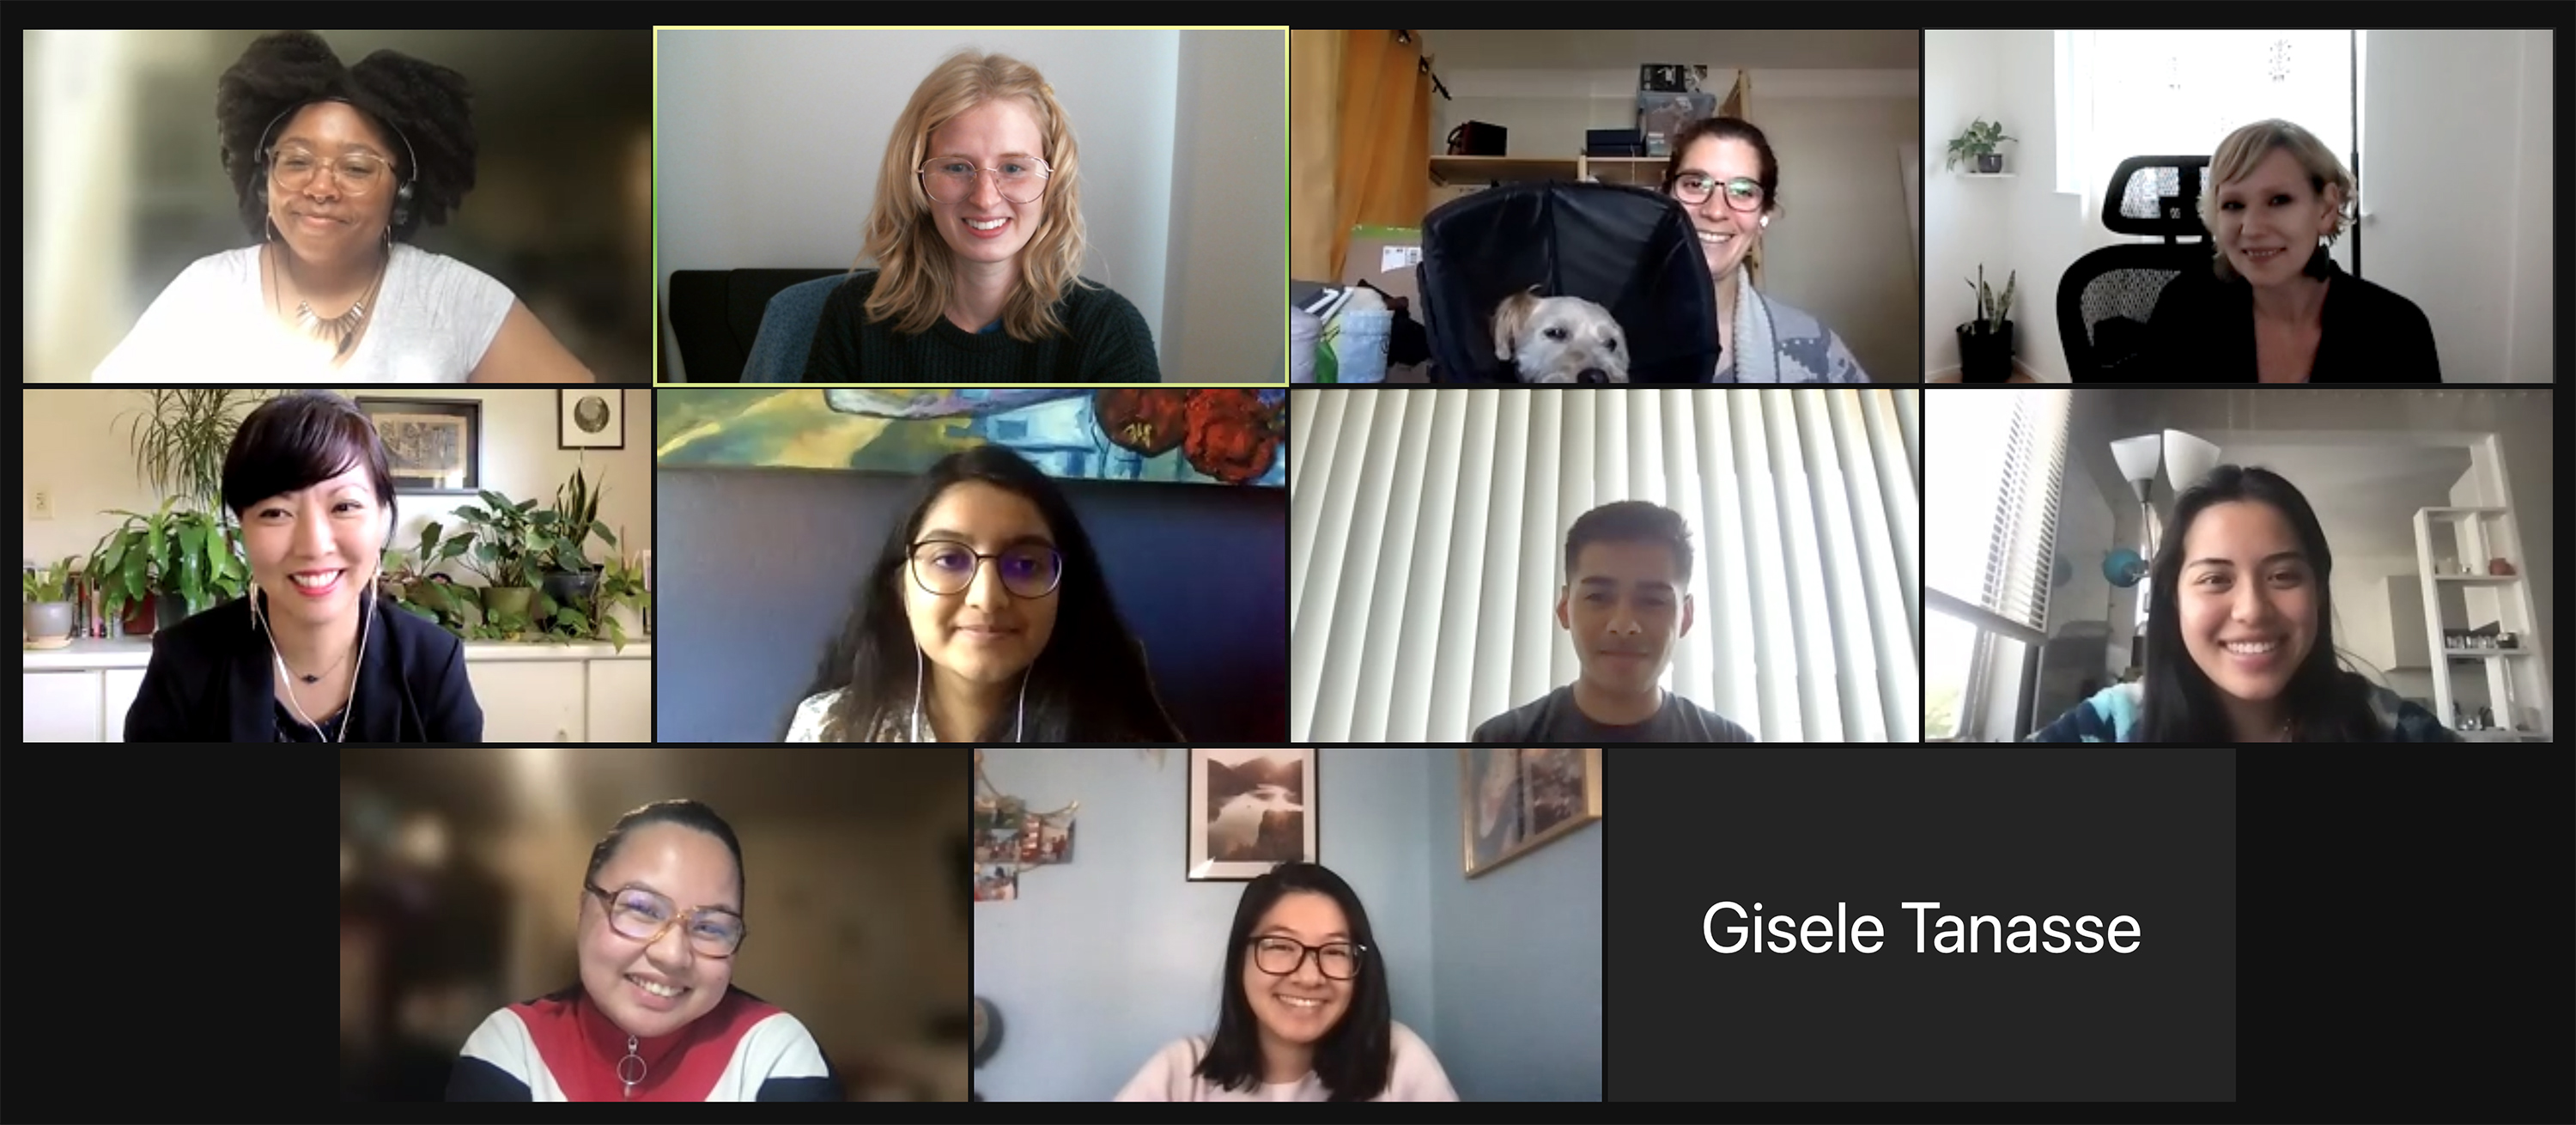 An online meeting of the Library Fellows